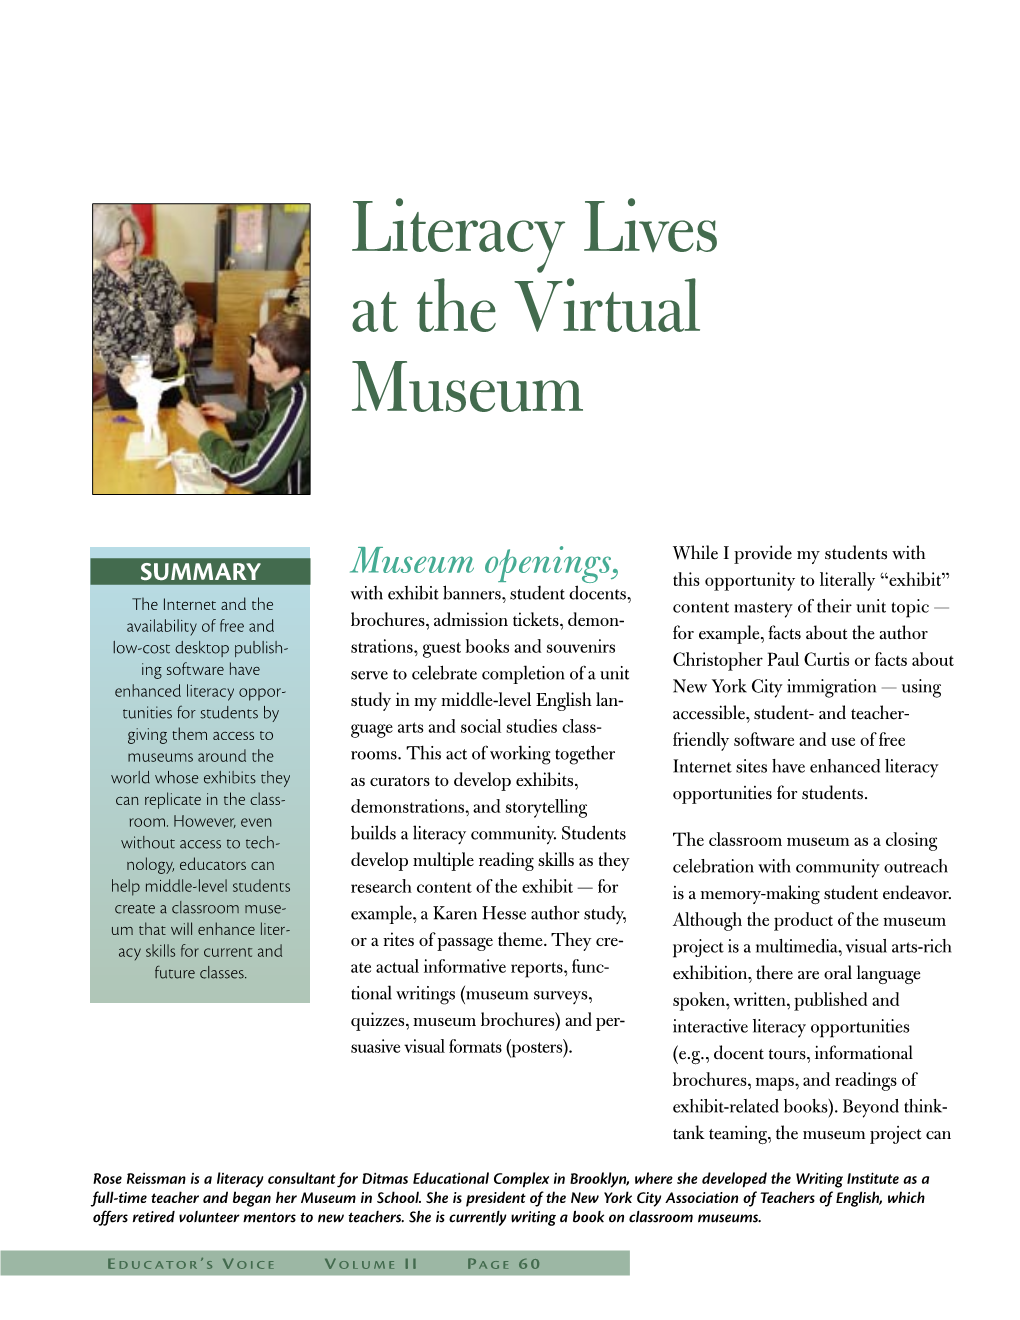 Literacy Lives at the Virtual Museum